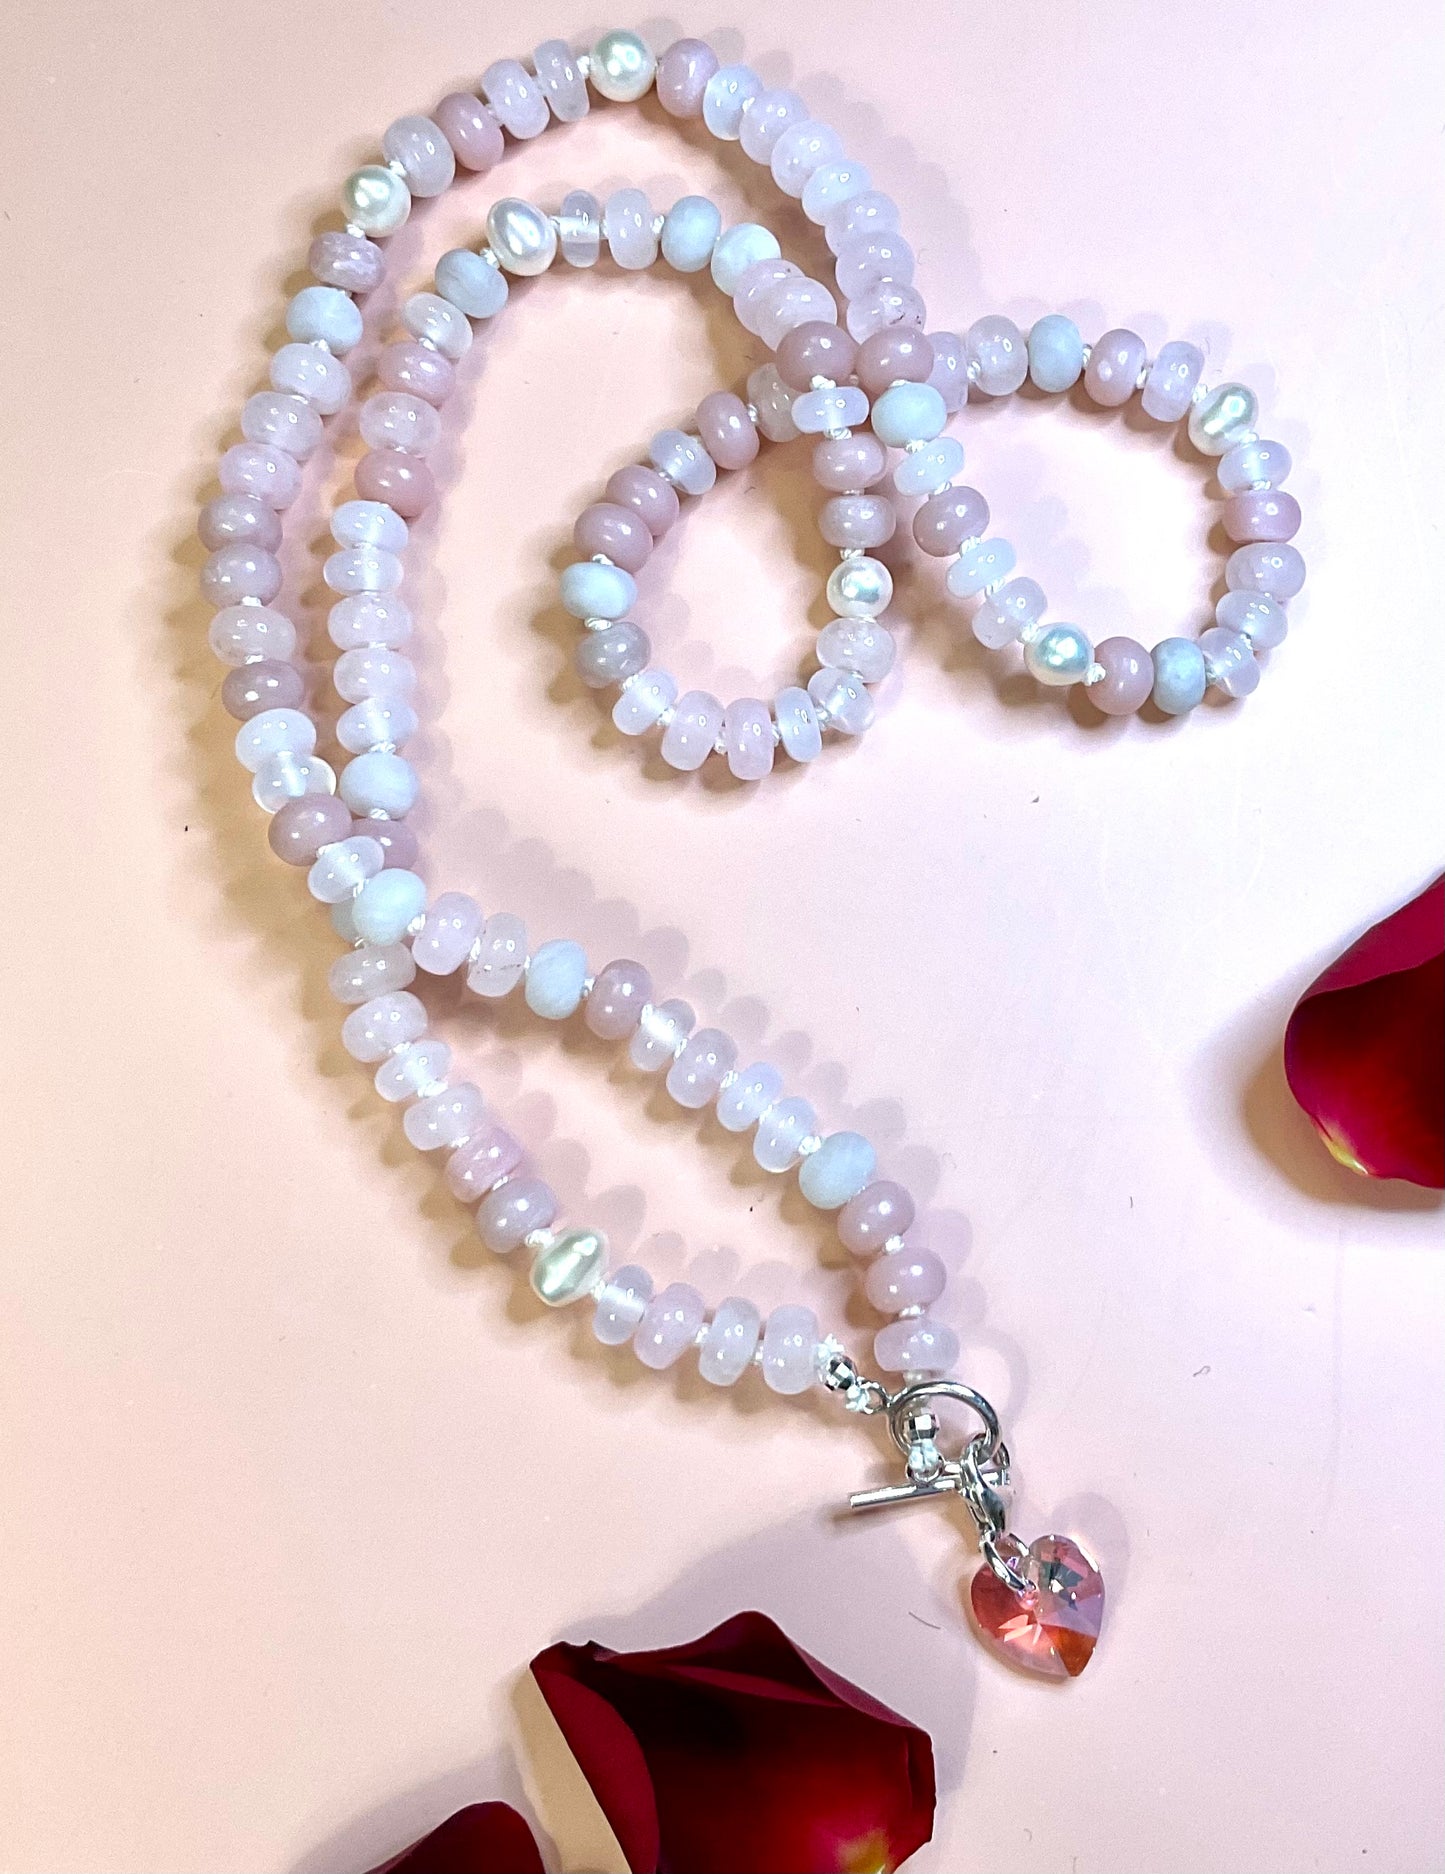 Hand-knotted Gemstone and Pearl Necklace with Heart Charm